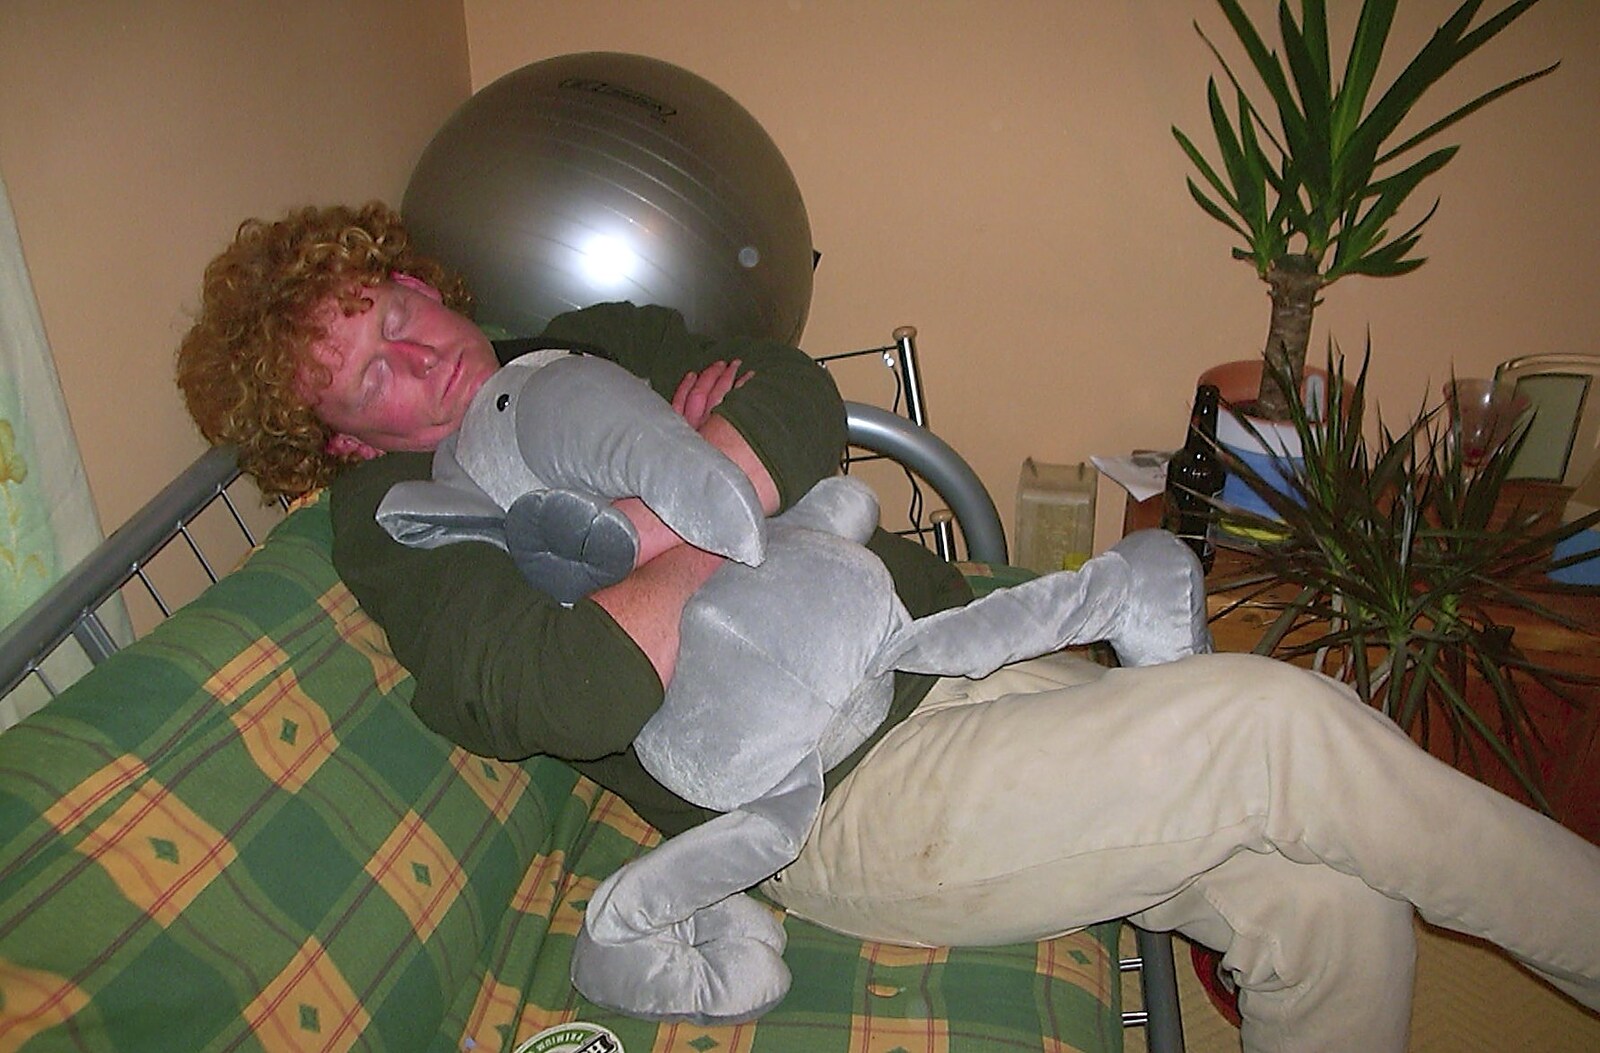 Trigenix Mexican and a Fire-Escape Barbeque, Eye, Suffolk - 22nd May 2004: Wavy gets some sleep and hugs a floppy elephant